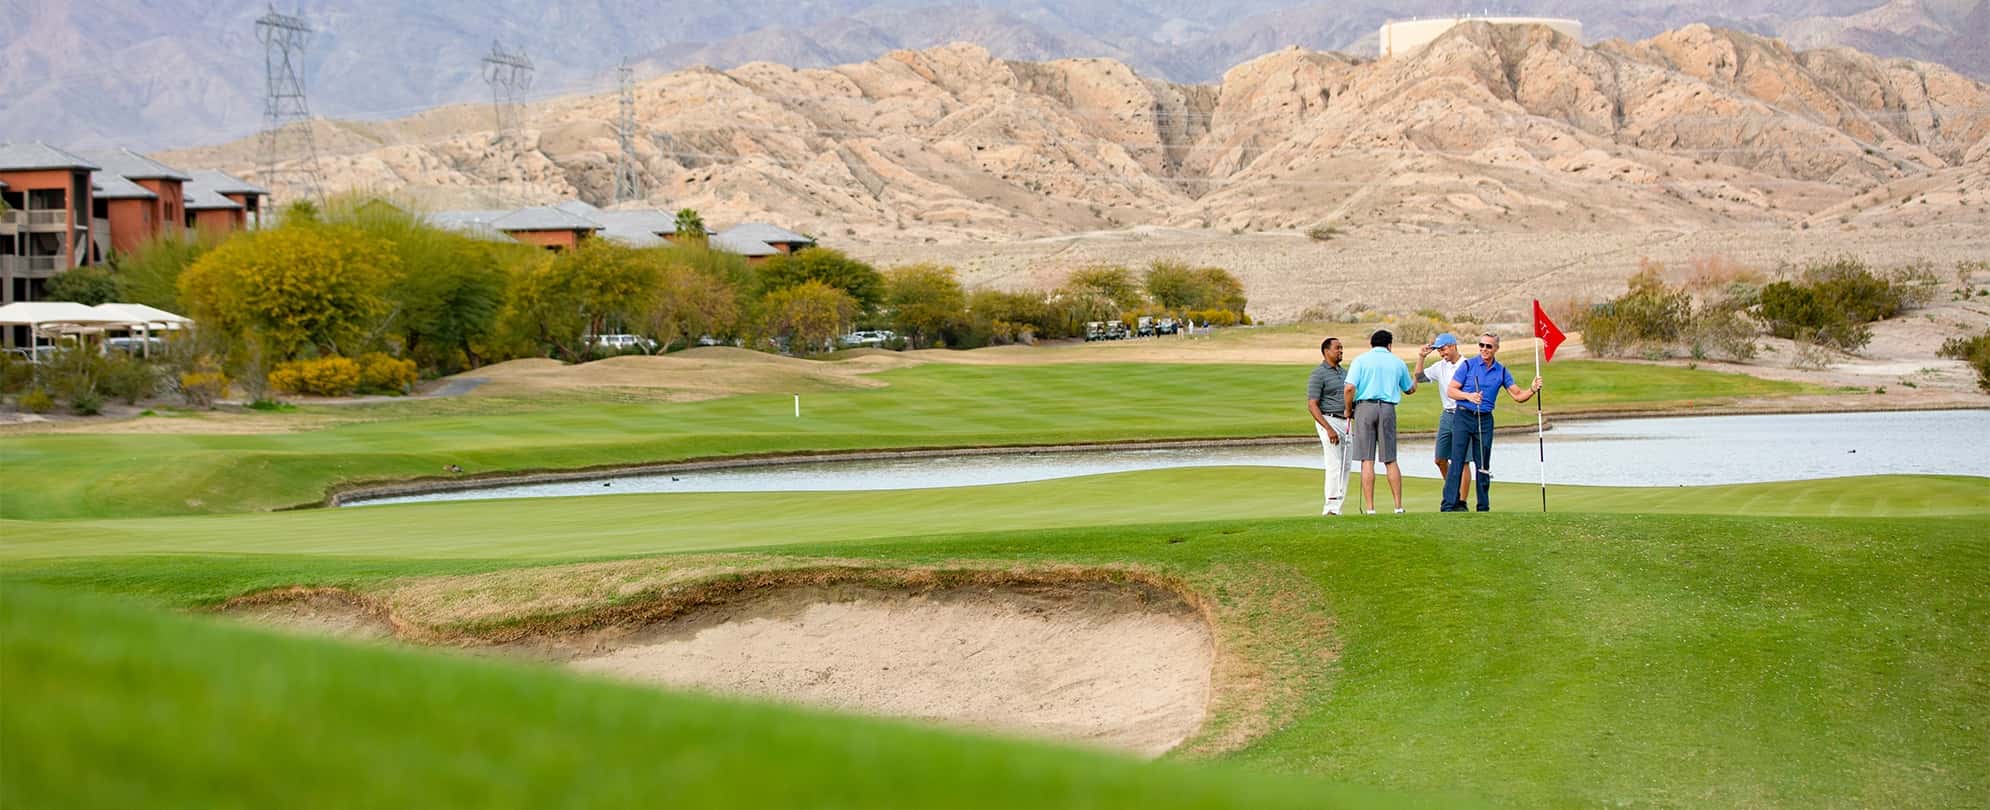 Four men chat on the golf course as they take the flag out of the hole at a Club Wyndham resort